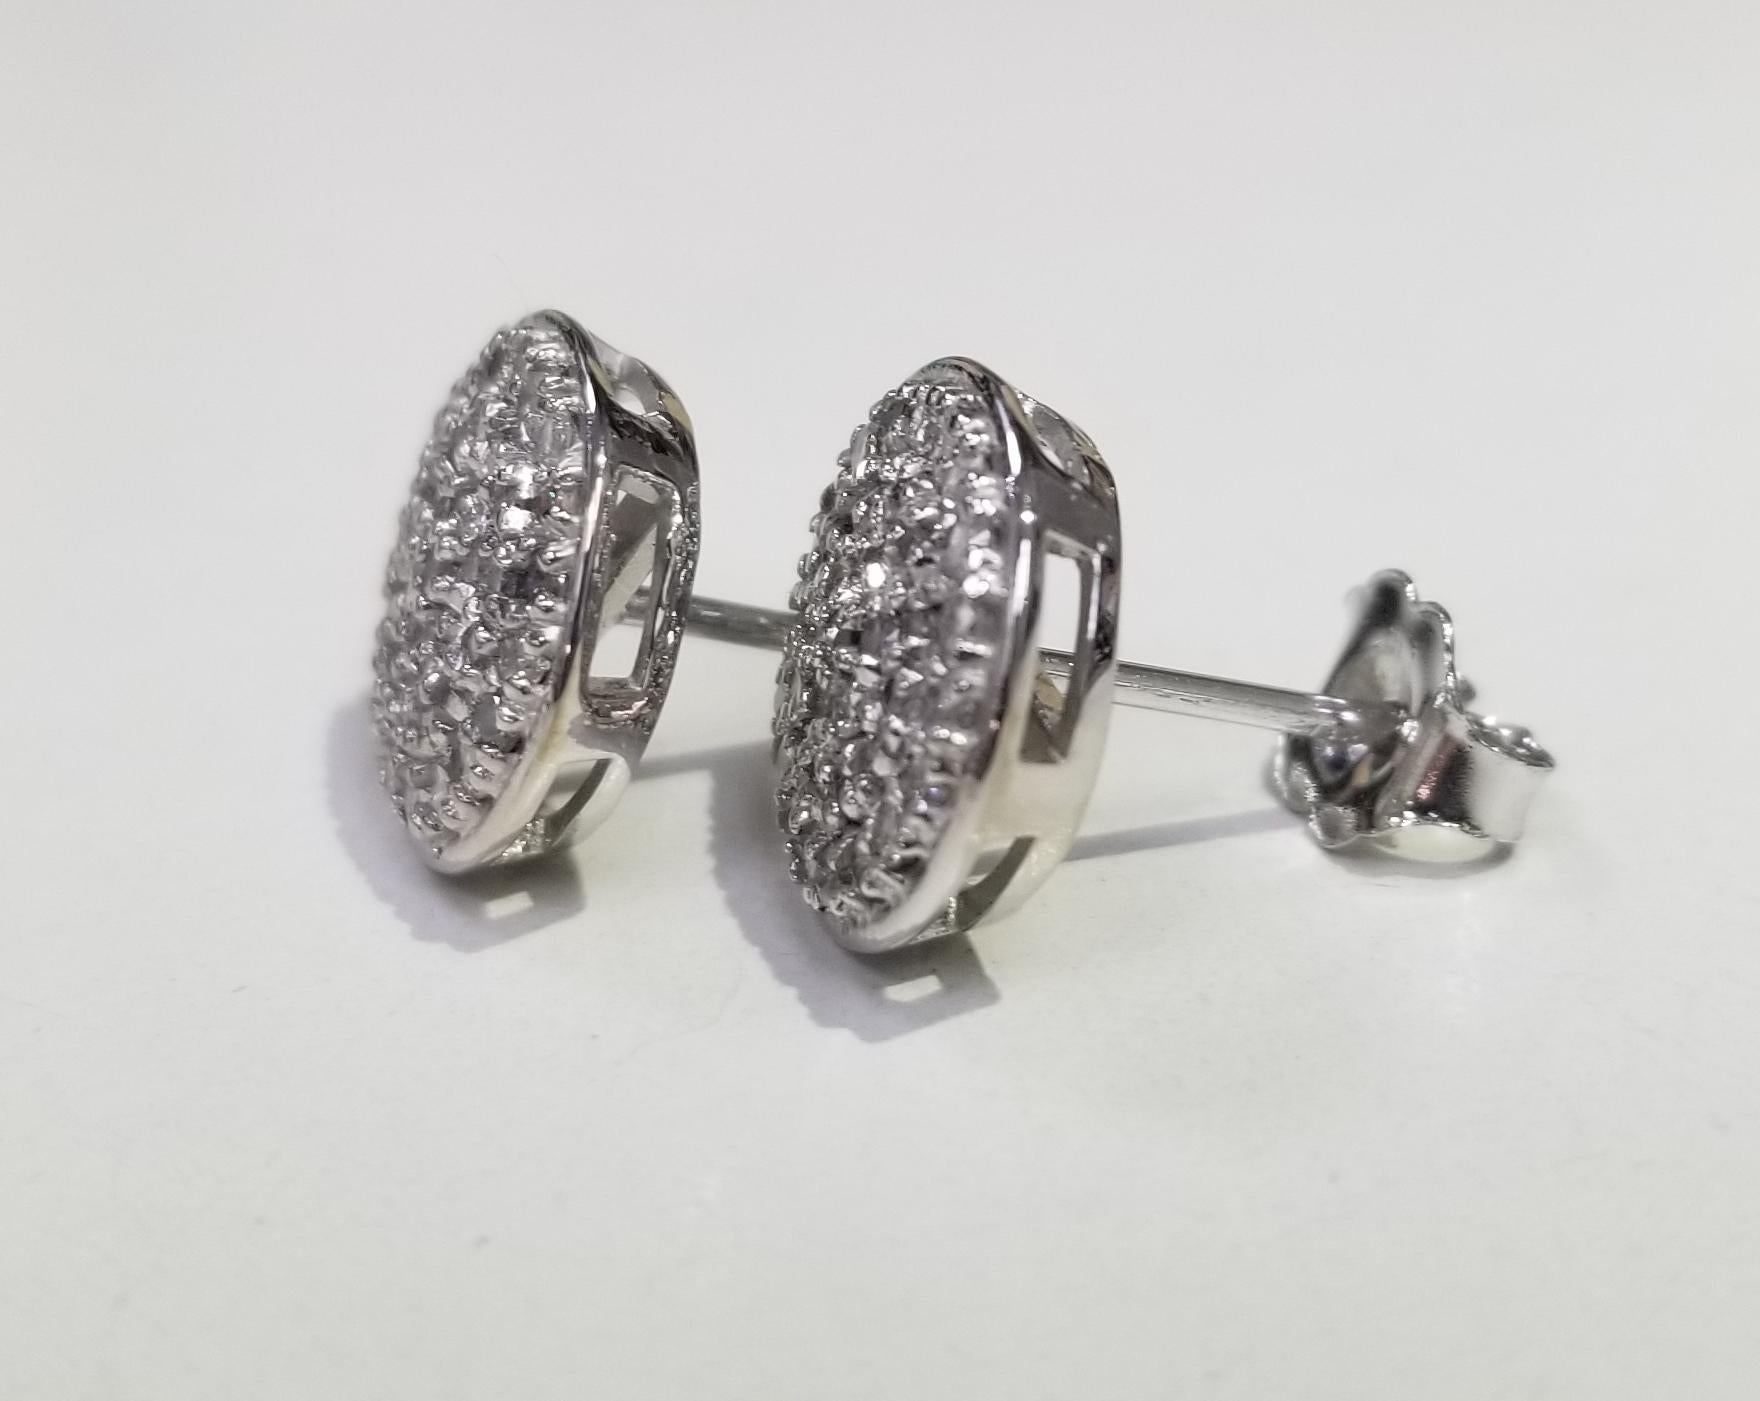 14k white gold 11mm diamond cluster round earrings pave' set with 78 round full cut diamonds weighing .75pts.